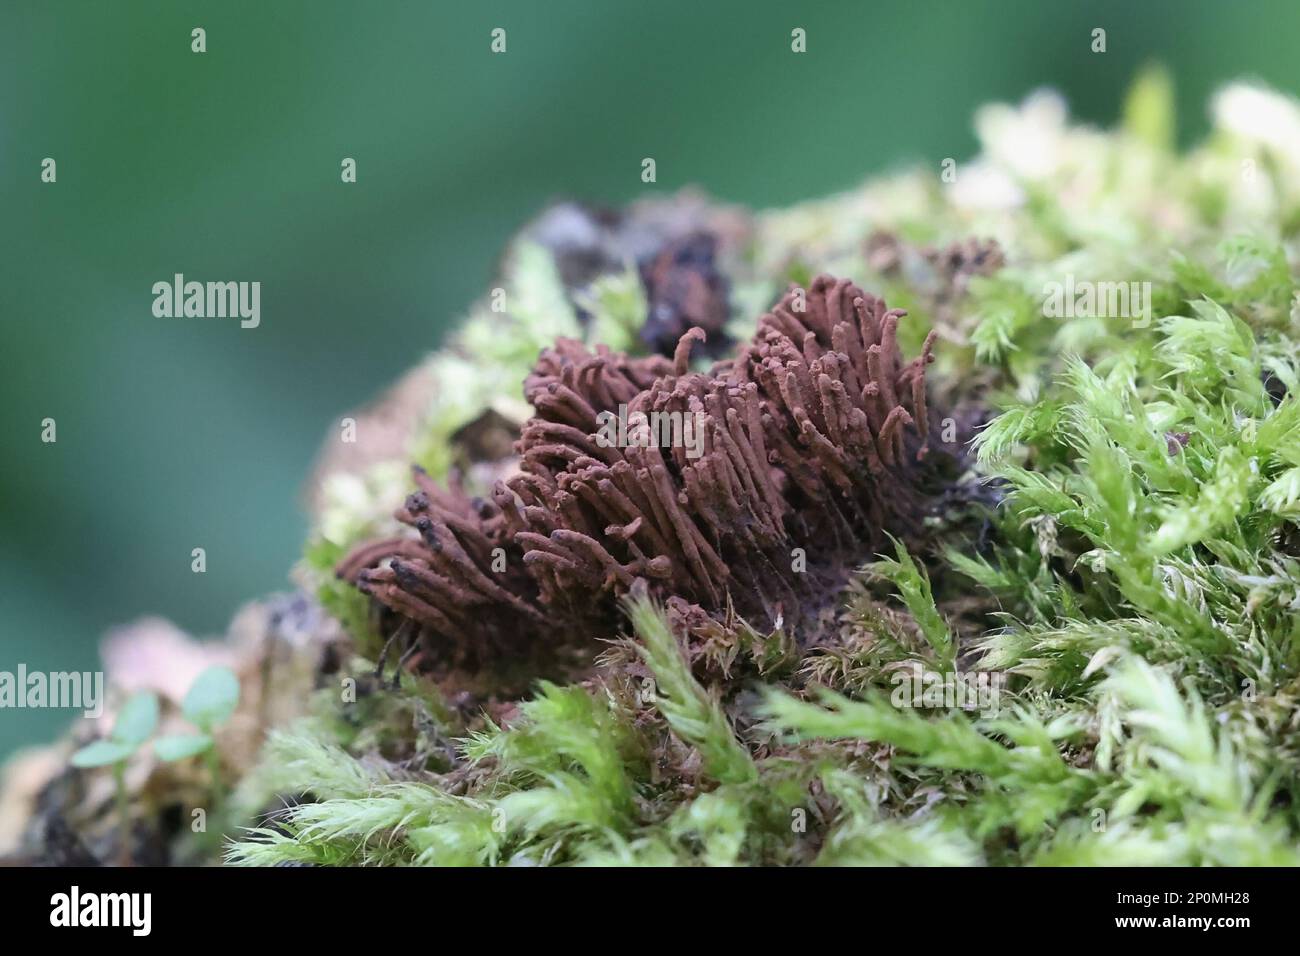 Stemonitis herbatica, a tube slime mold from Finland, no common English name Stock Photo